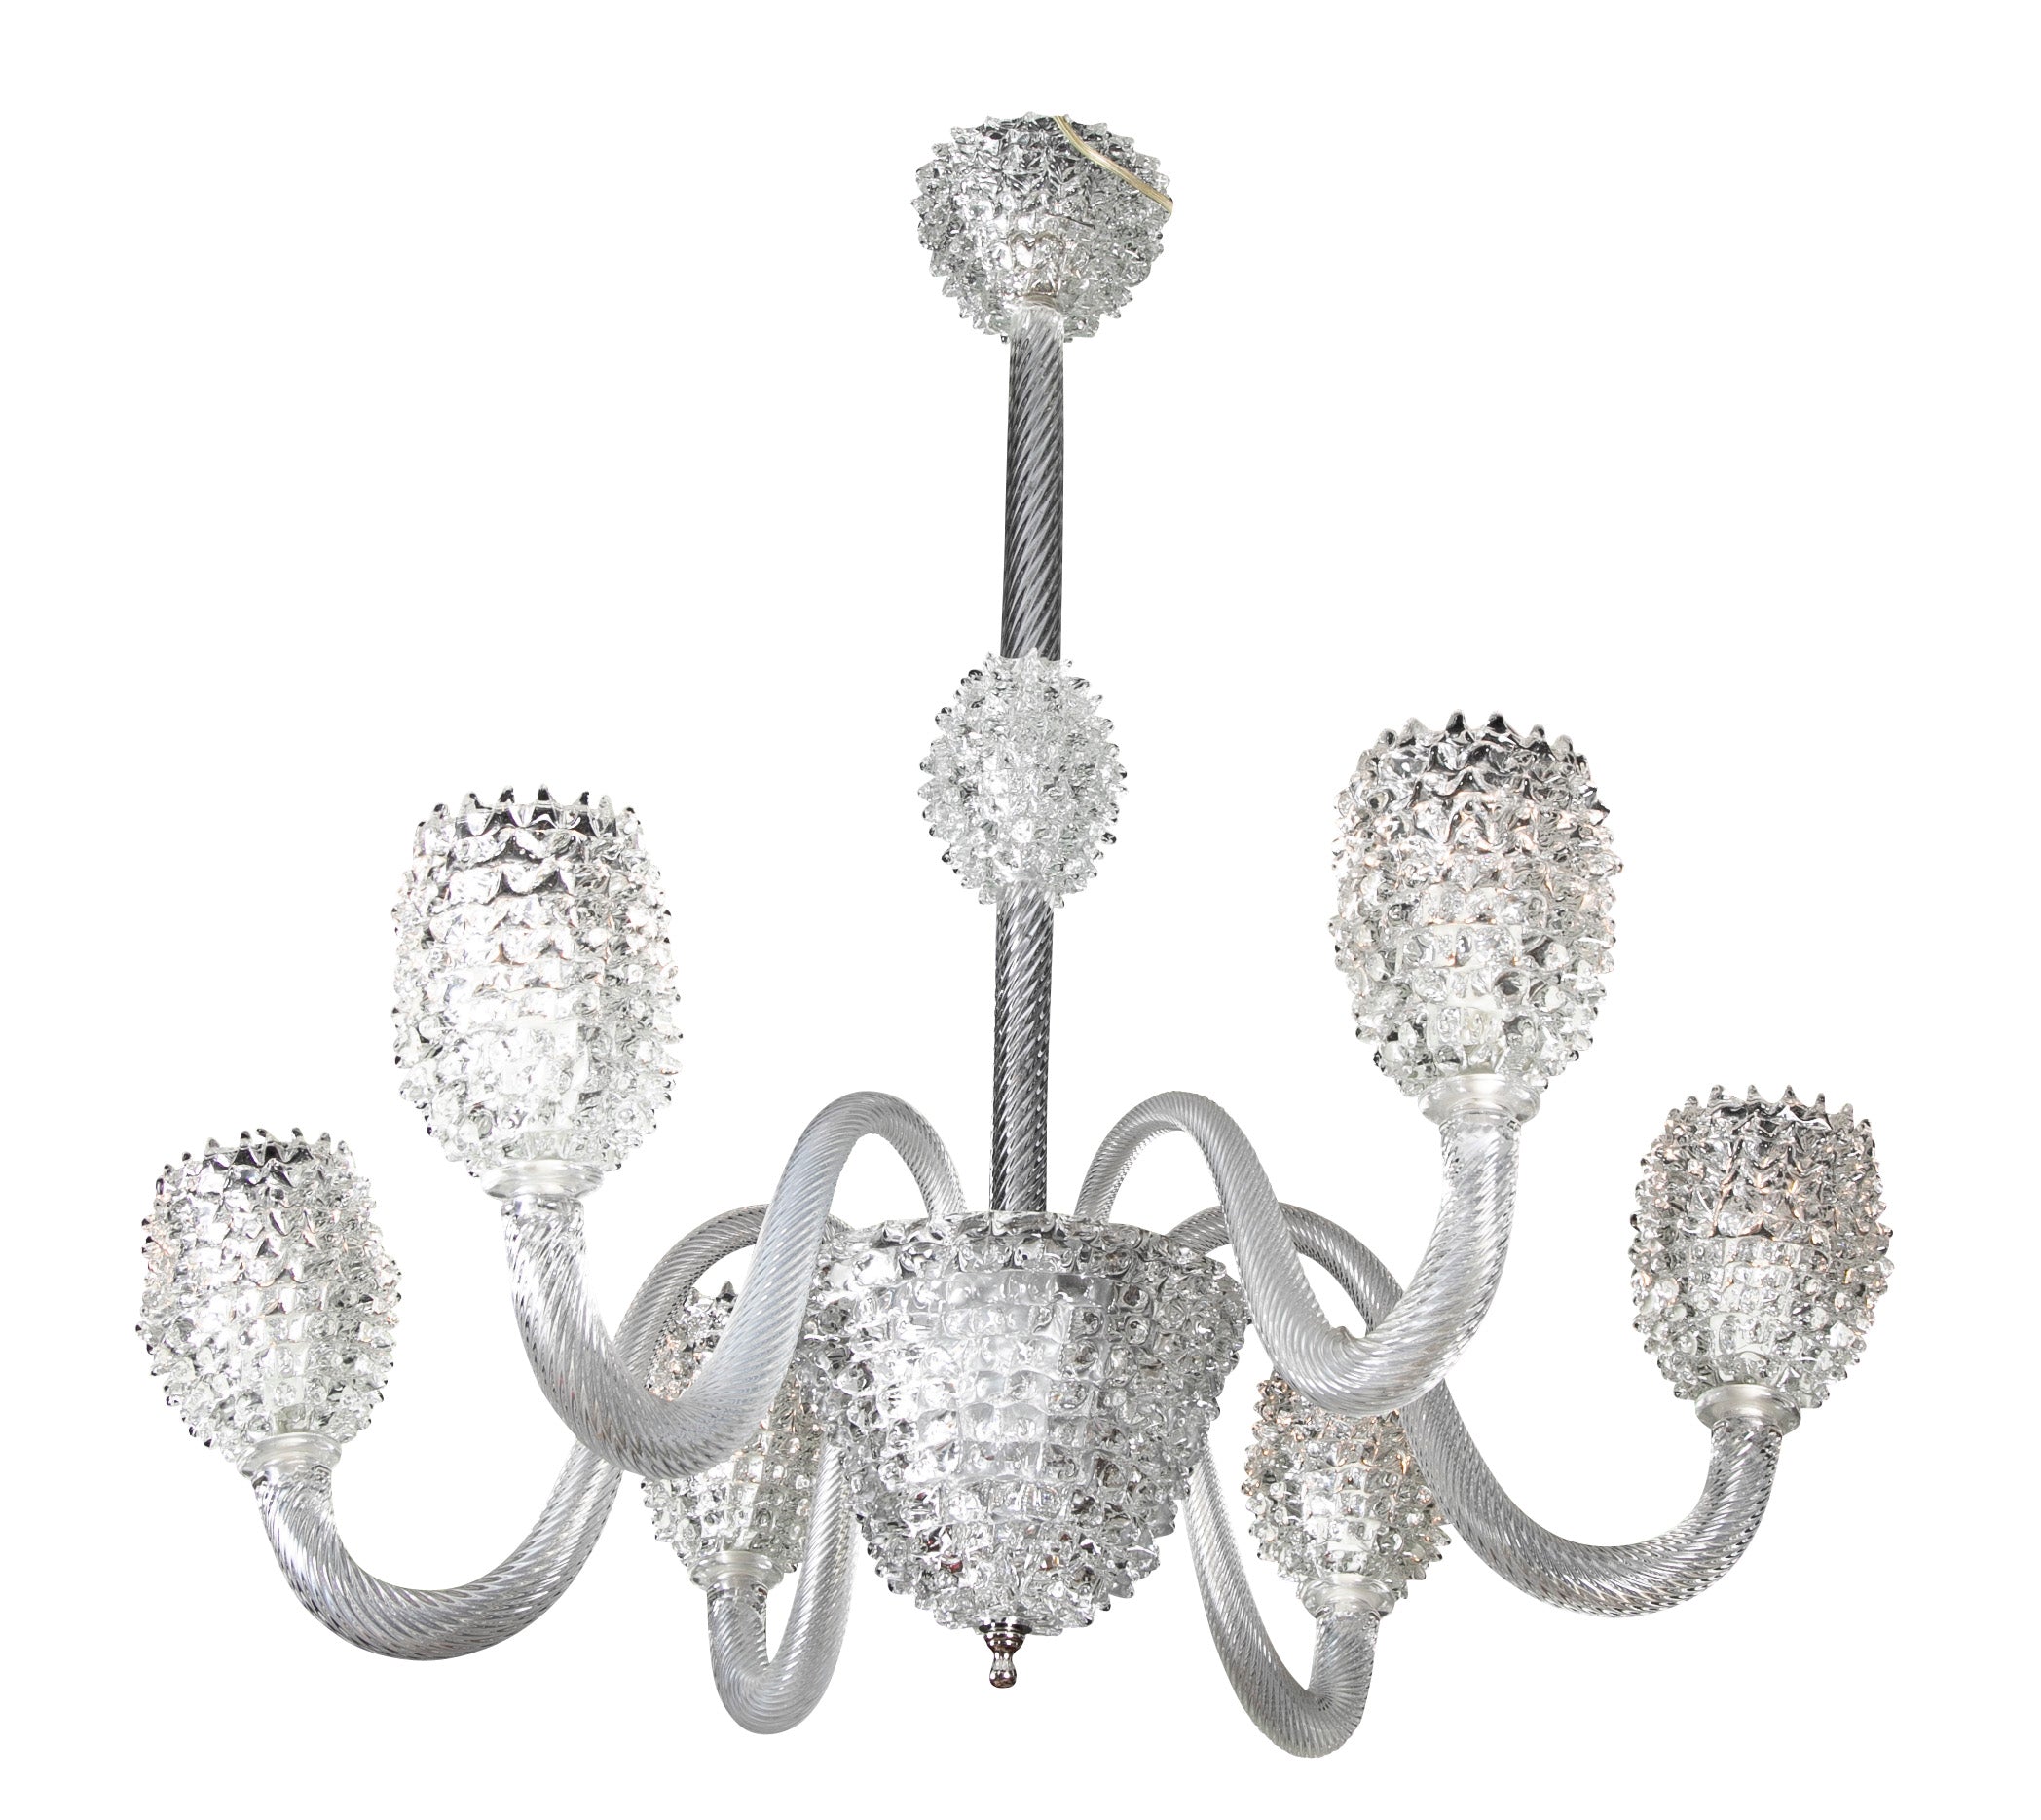 Italian Mid-Century Rostrato Glass Chandelier Attributed to Barovier Toso